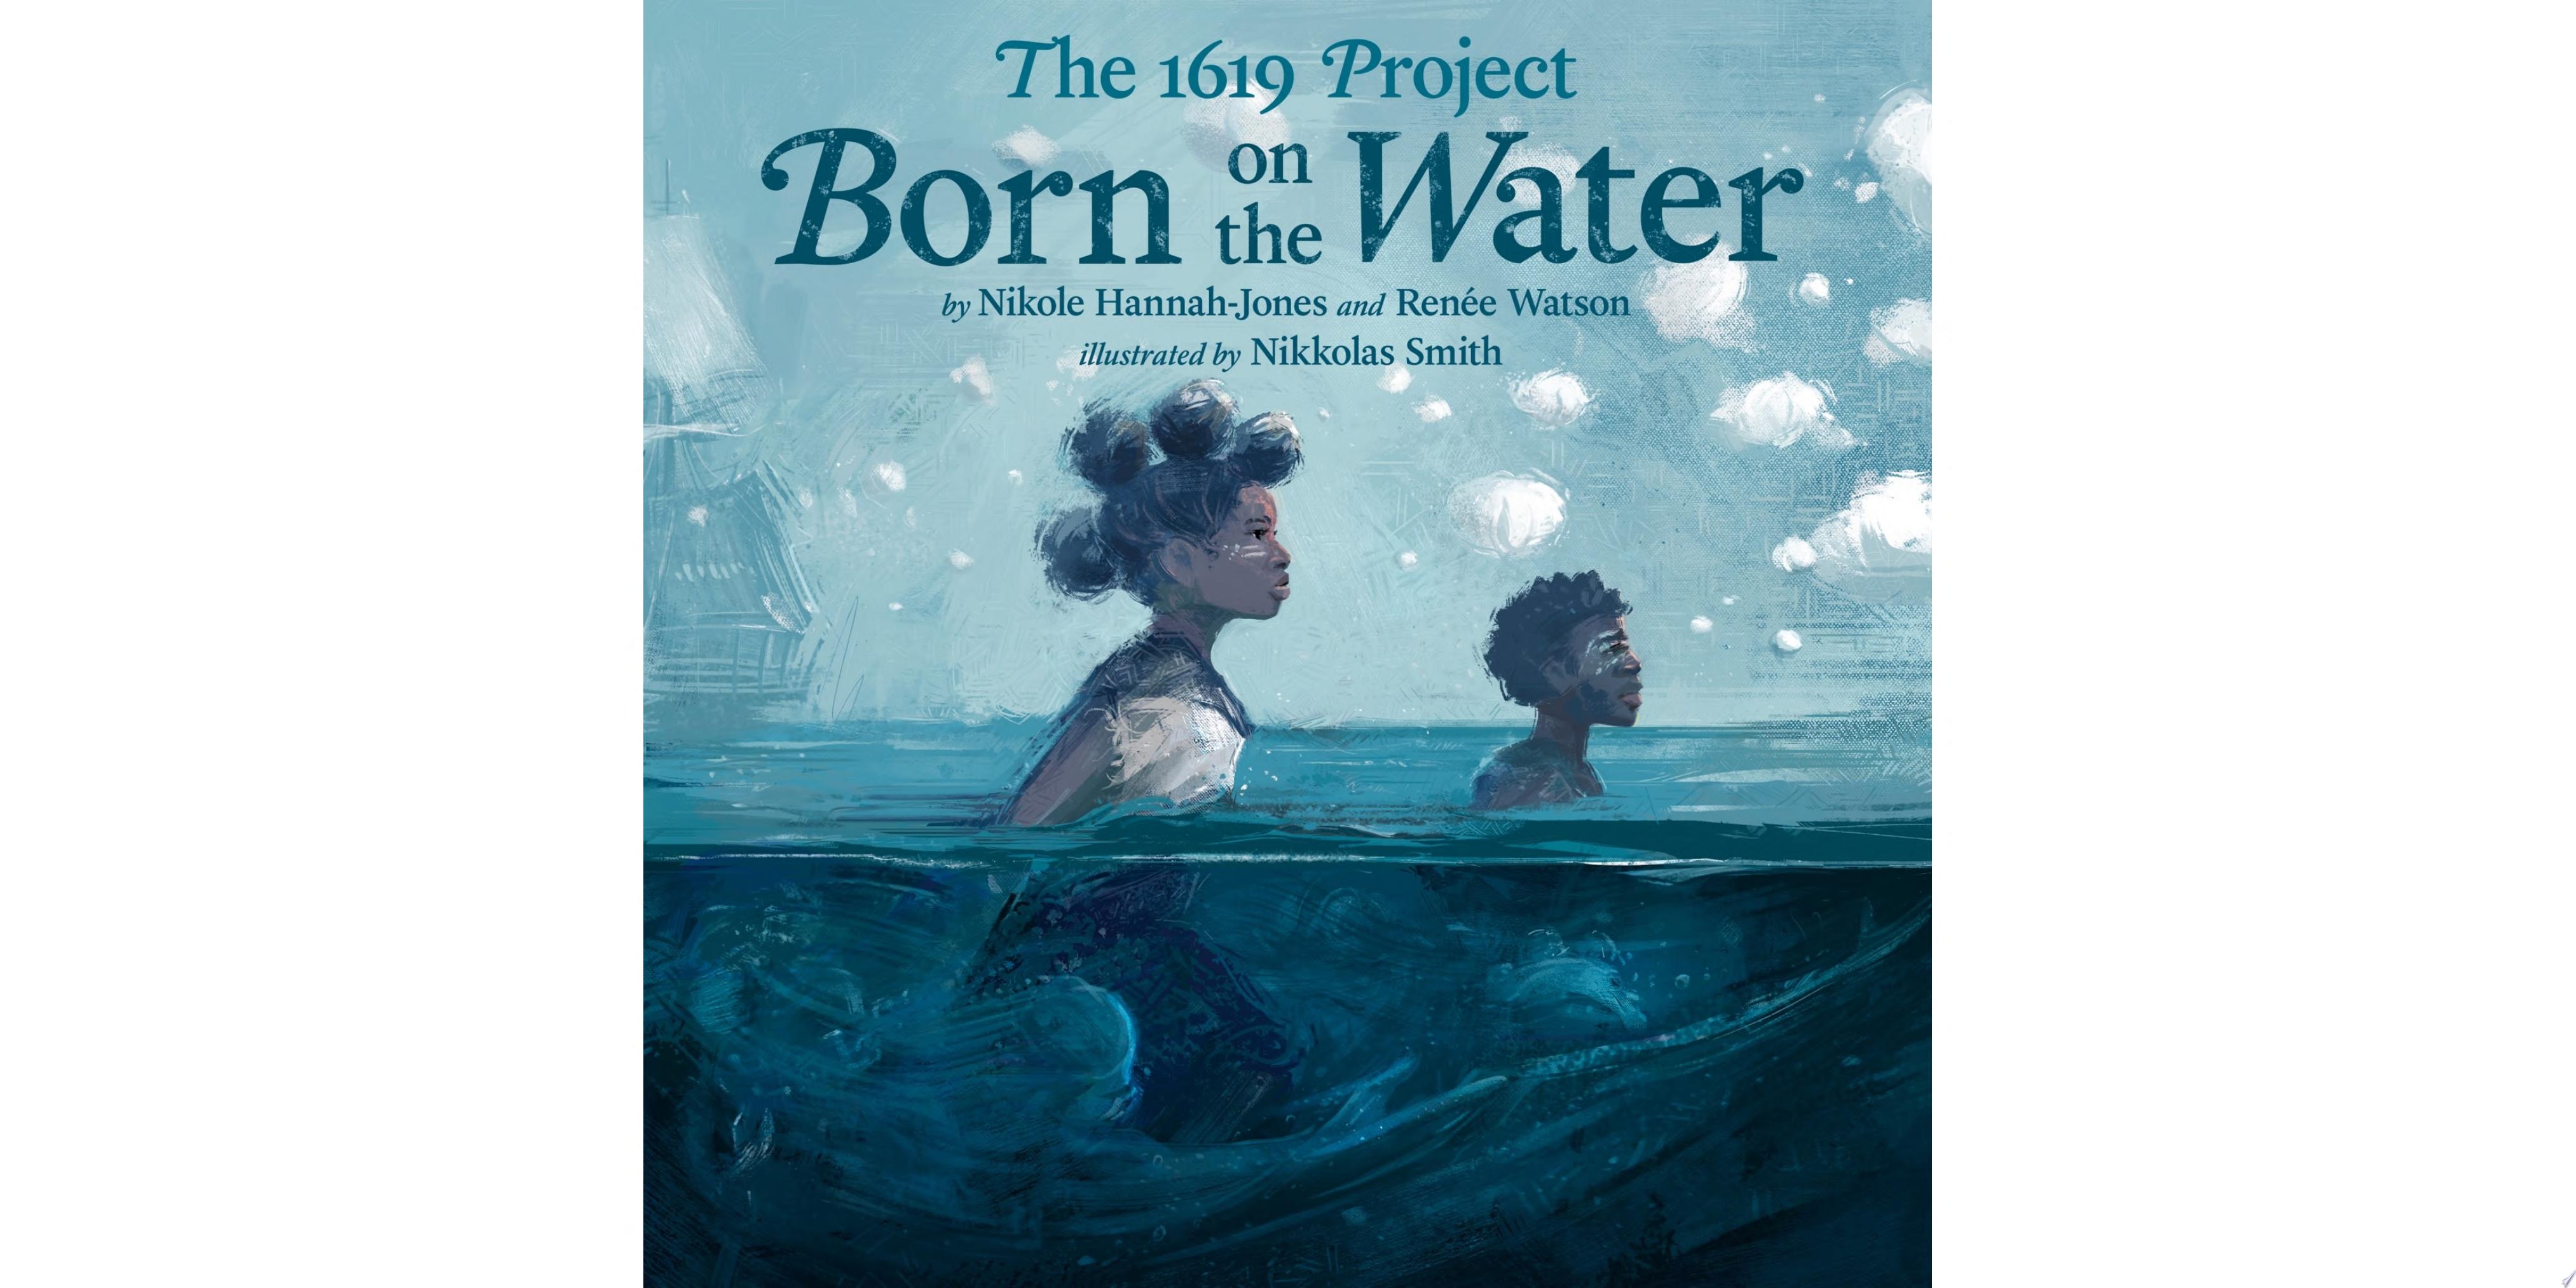 Image for "The 1619 Project: Born on the Water"